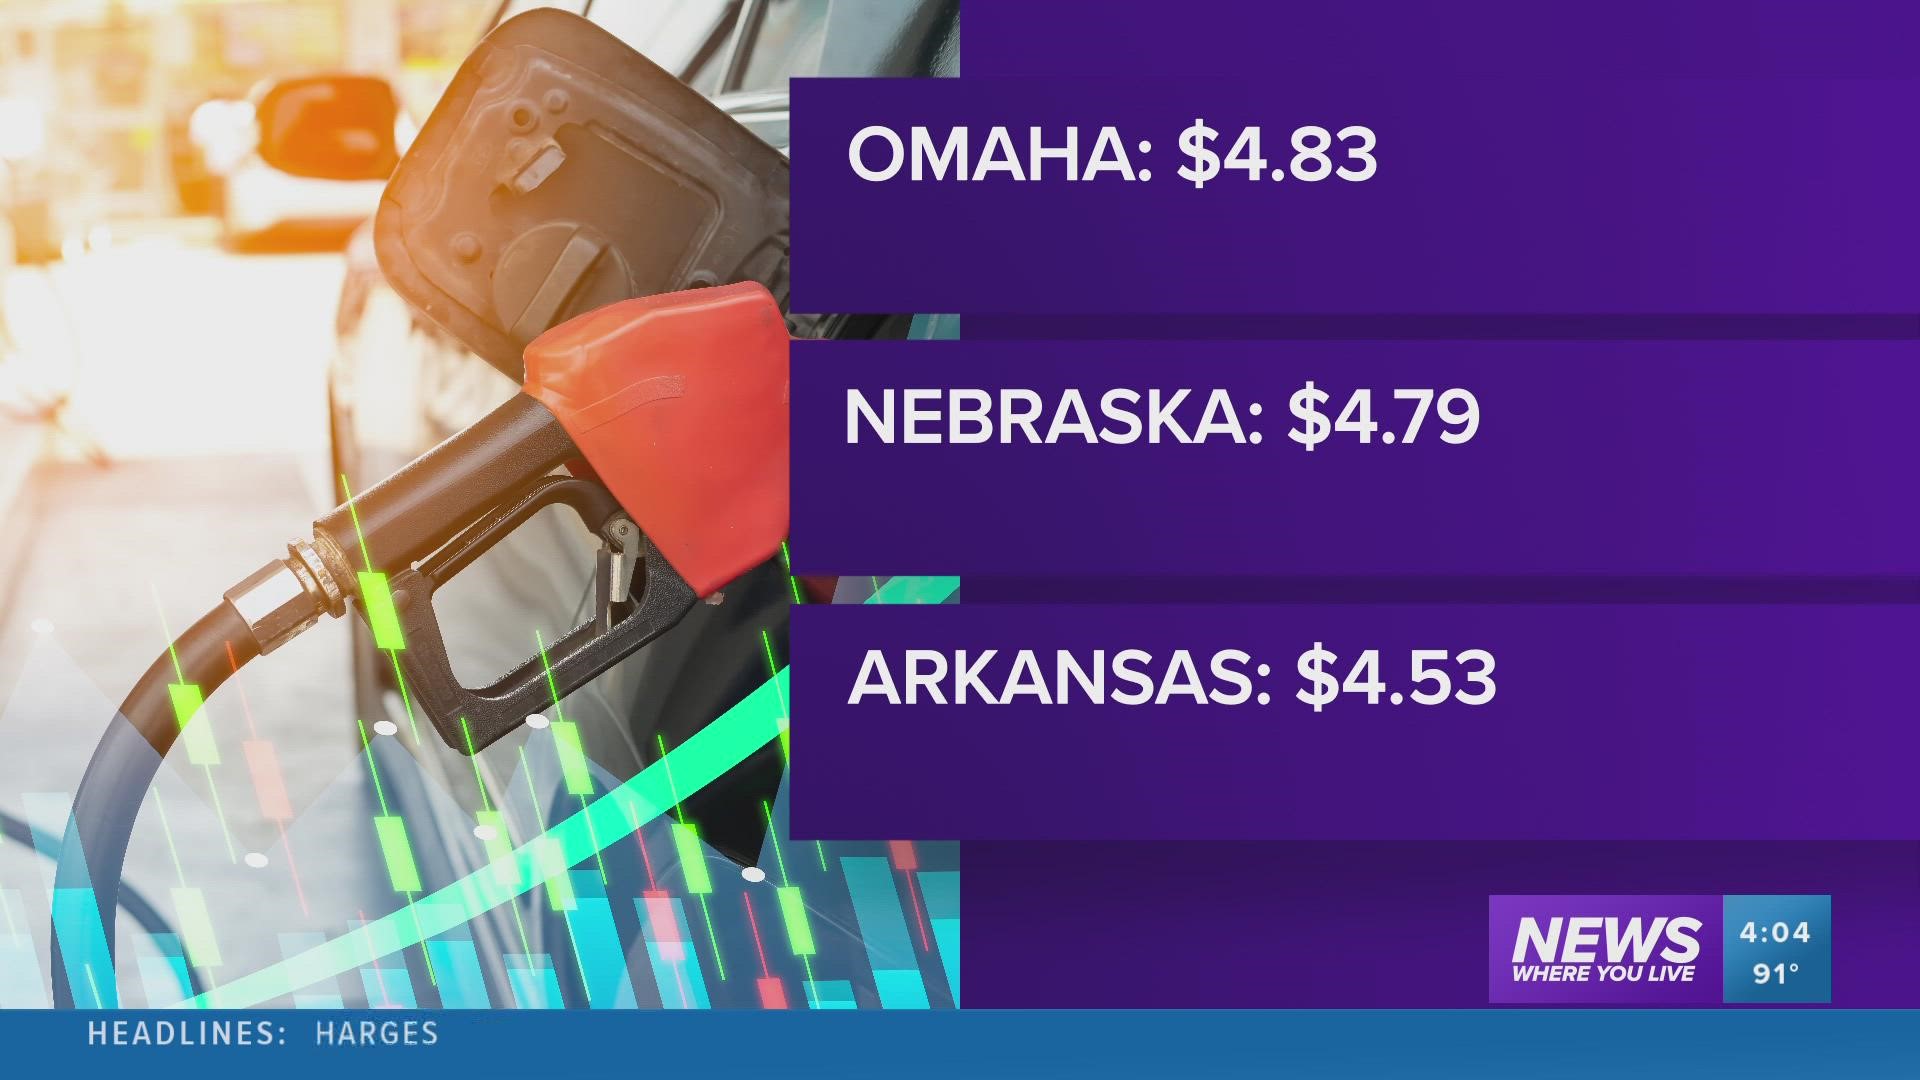 Fans are hitting the road to watch the OmaHogs play in the College World Series, but some are feeling the impacts of rising gas prices and inflation.